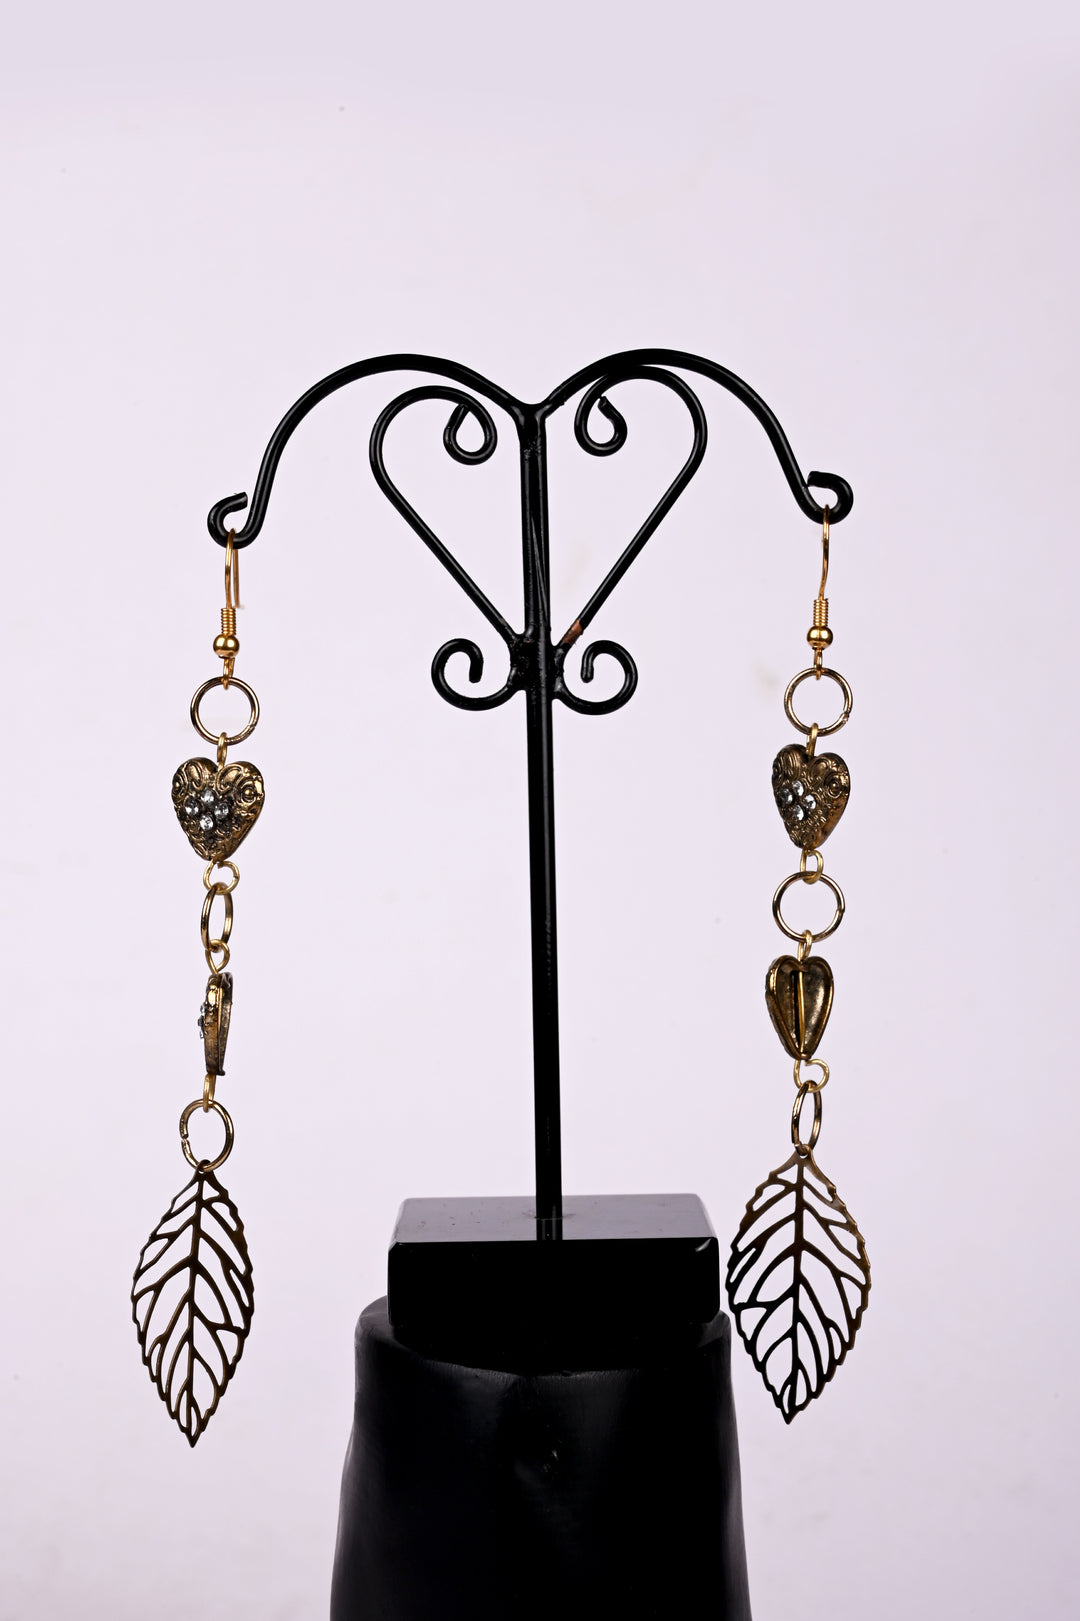 Heart Shaped Metal Charms Earring Styled With Metal Leaf Charms